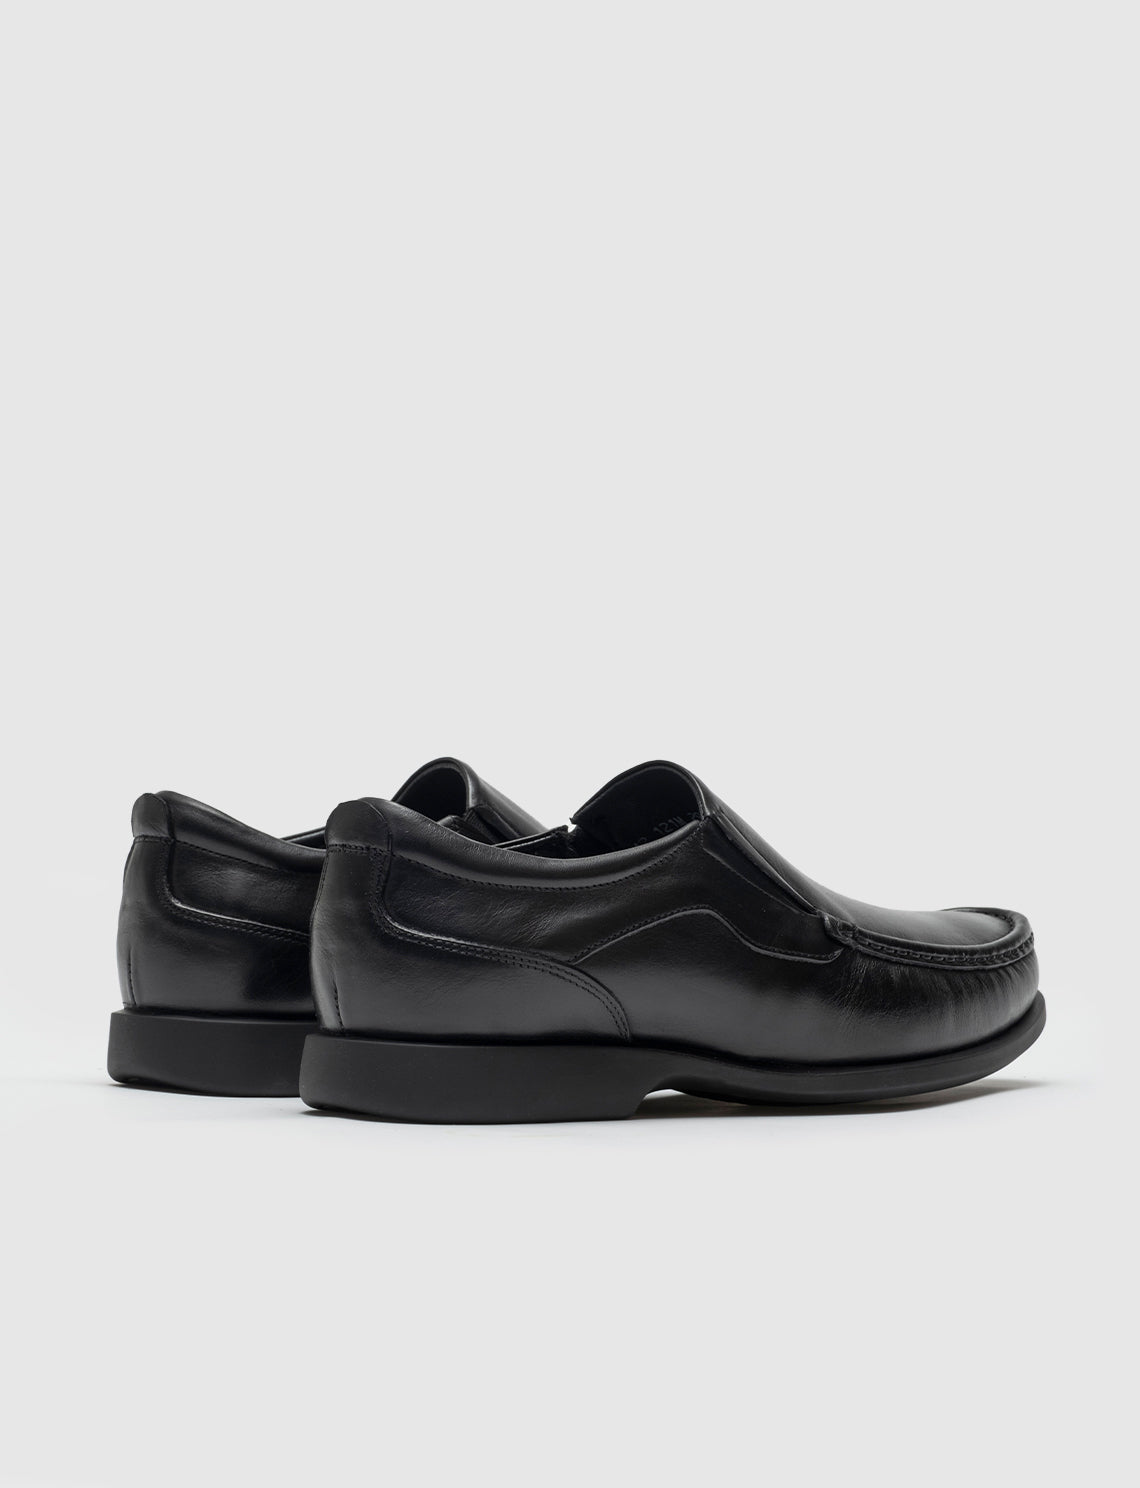 Men Black Genuine Leather Slip On Casual Shoes